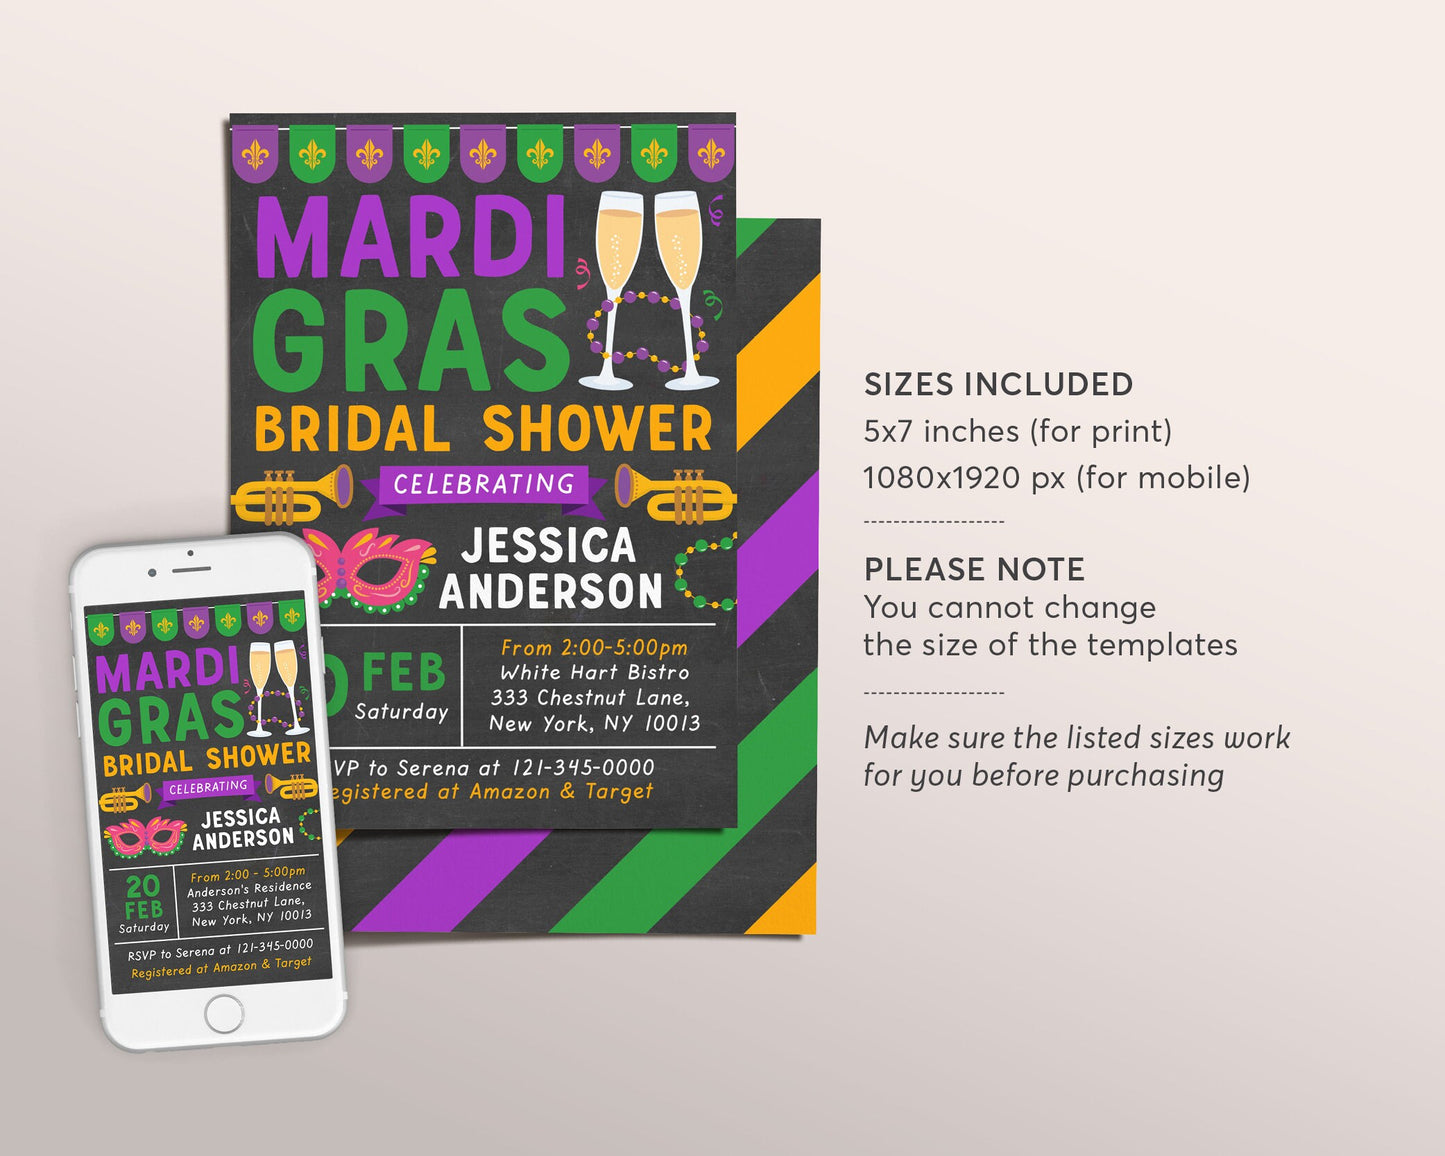 Mardi Gras Bridal Shower Invitation Editable Template, Miss to Mrs Couples Shower Wedding Invite Evite, Fat Tuesday Engagement Party